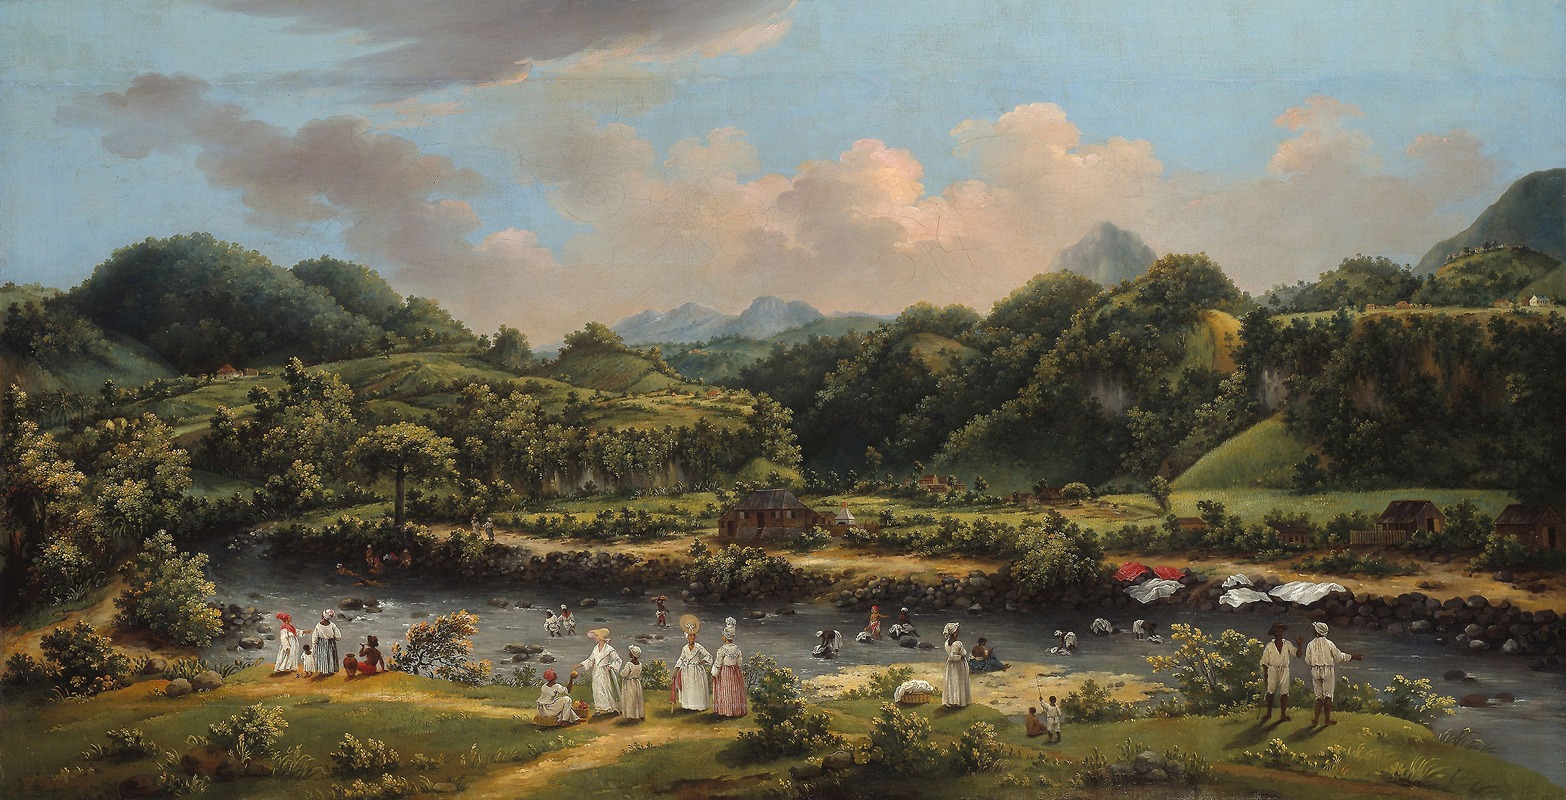 Agostino Brunias - View on the River Roseau, Dominica